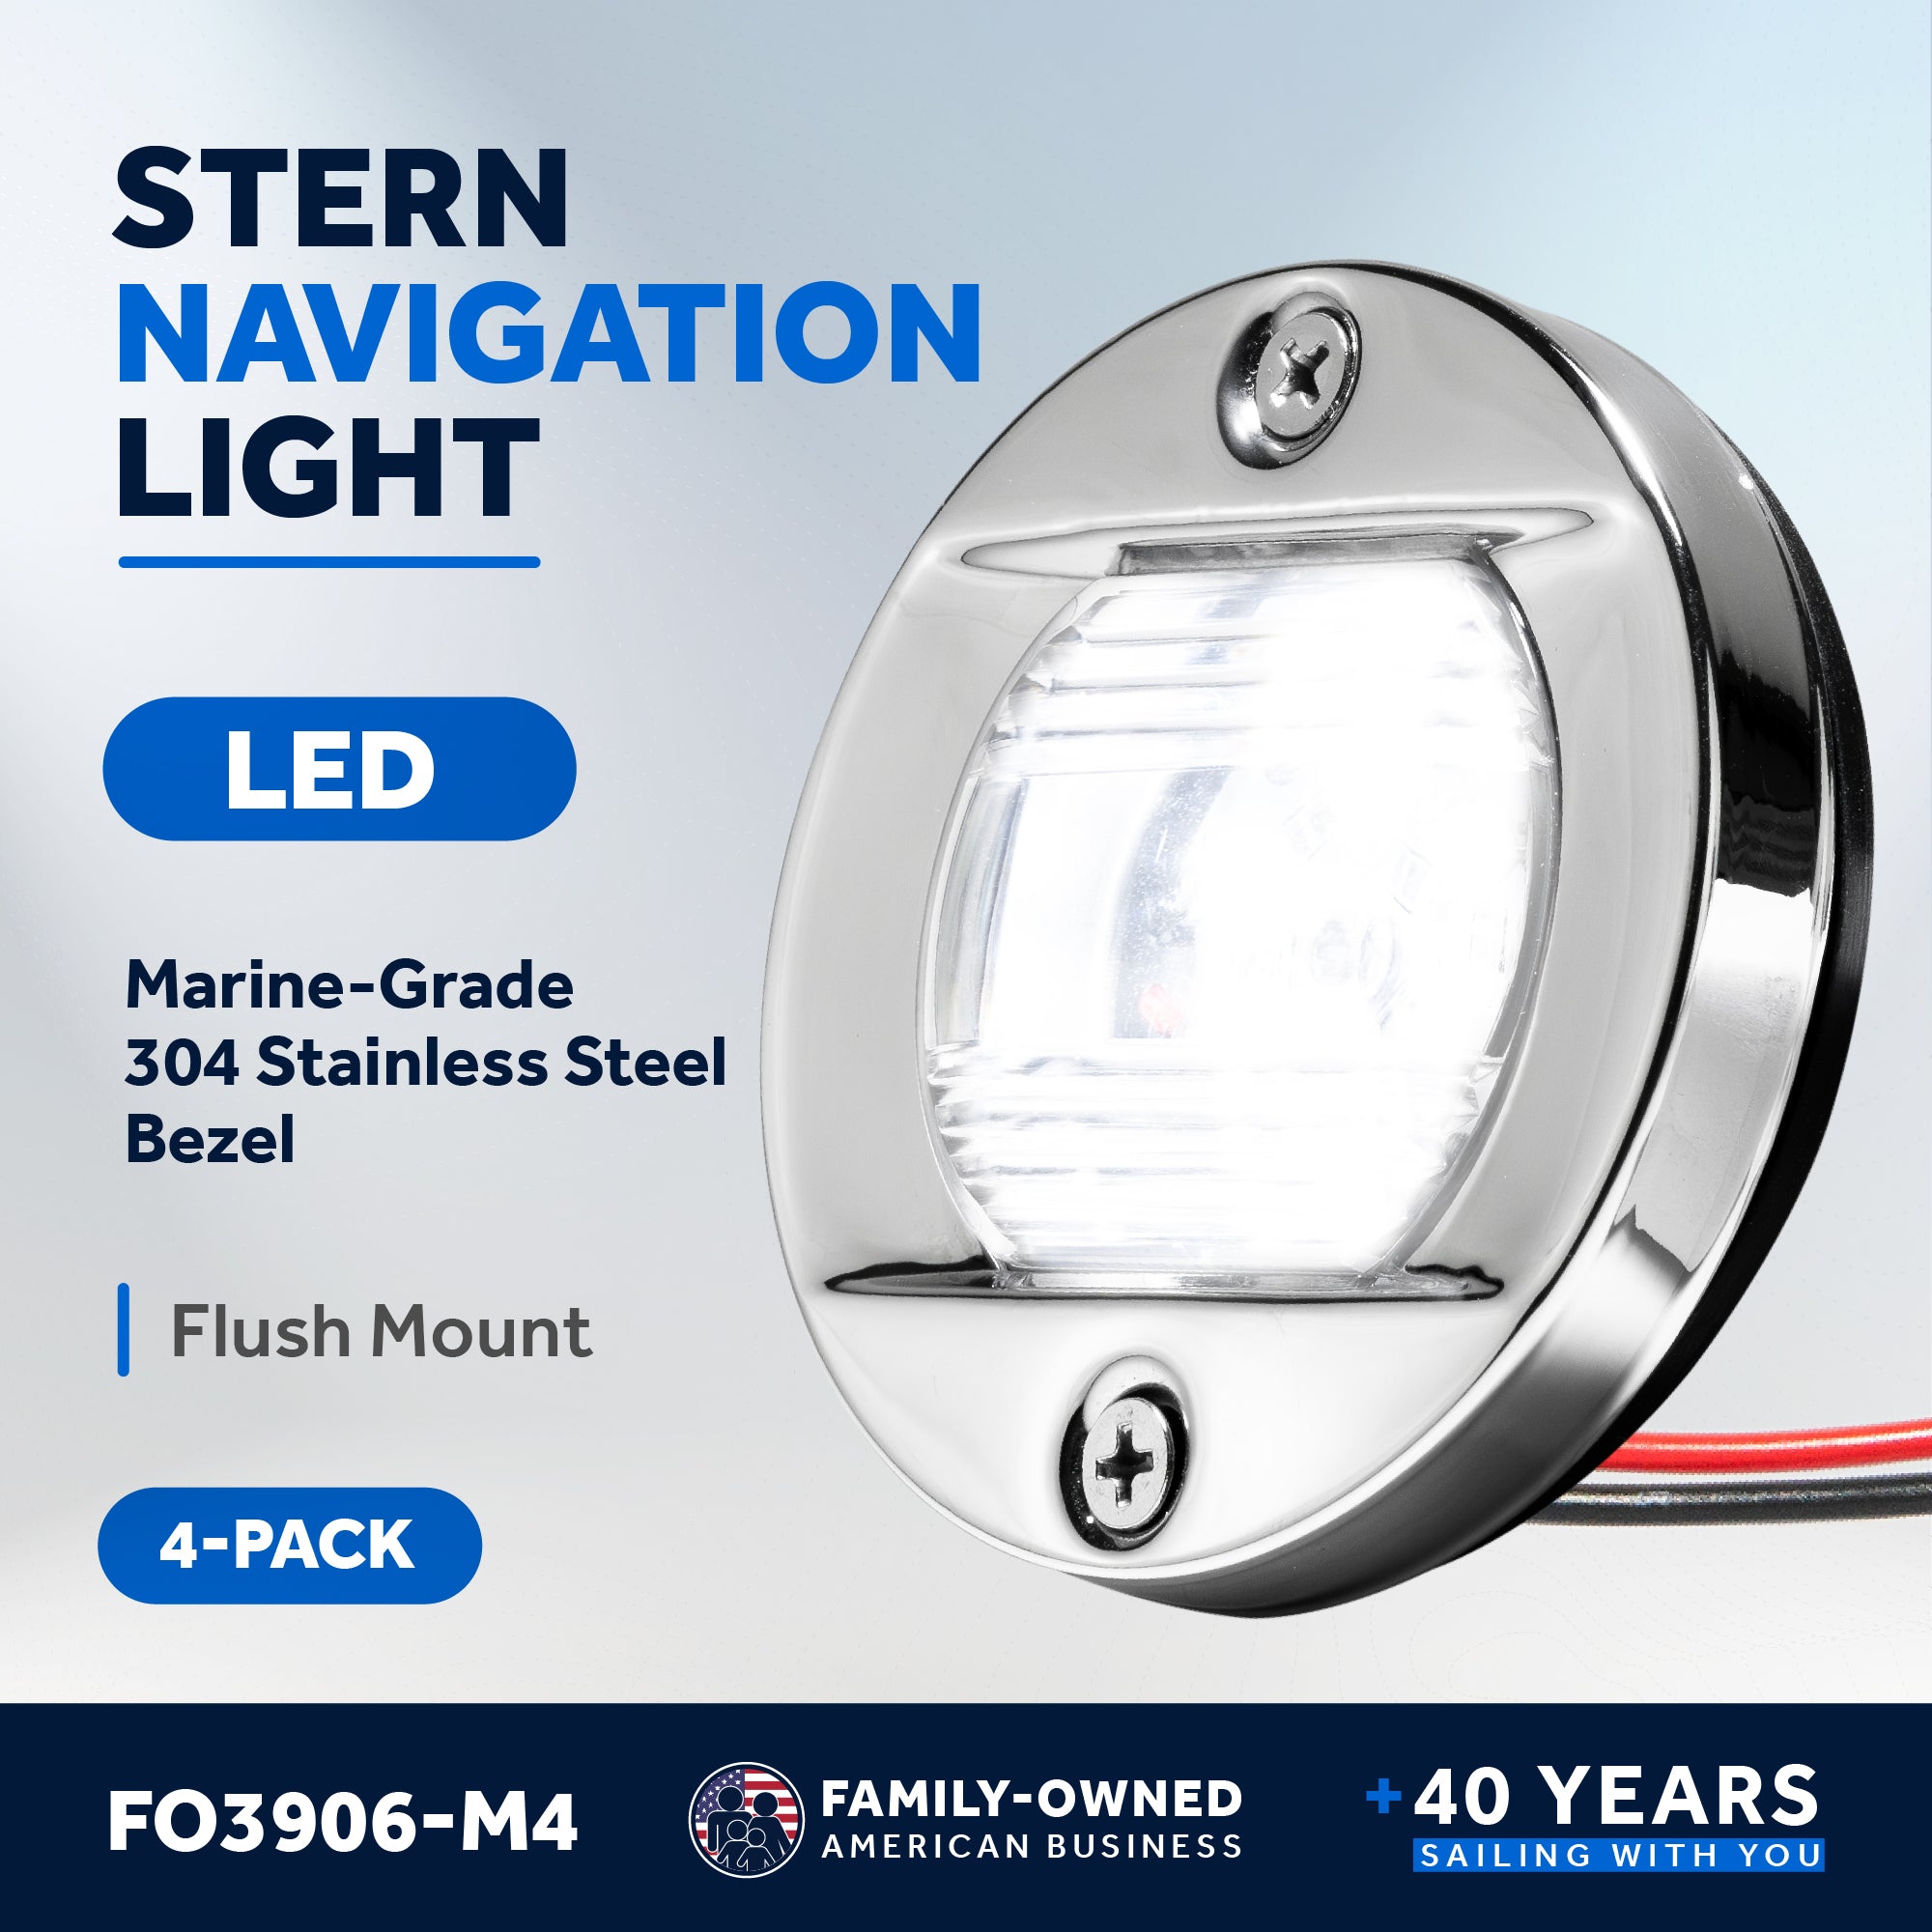 LED Courtesy Navigation Lights, Round Stainless Steel, Daylight, 4-Pack - FO3906-M4